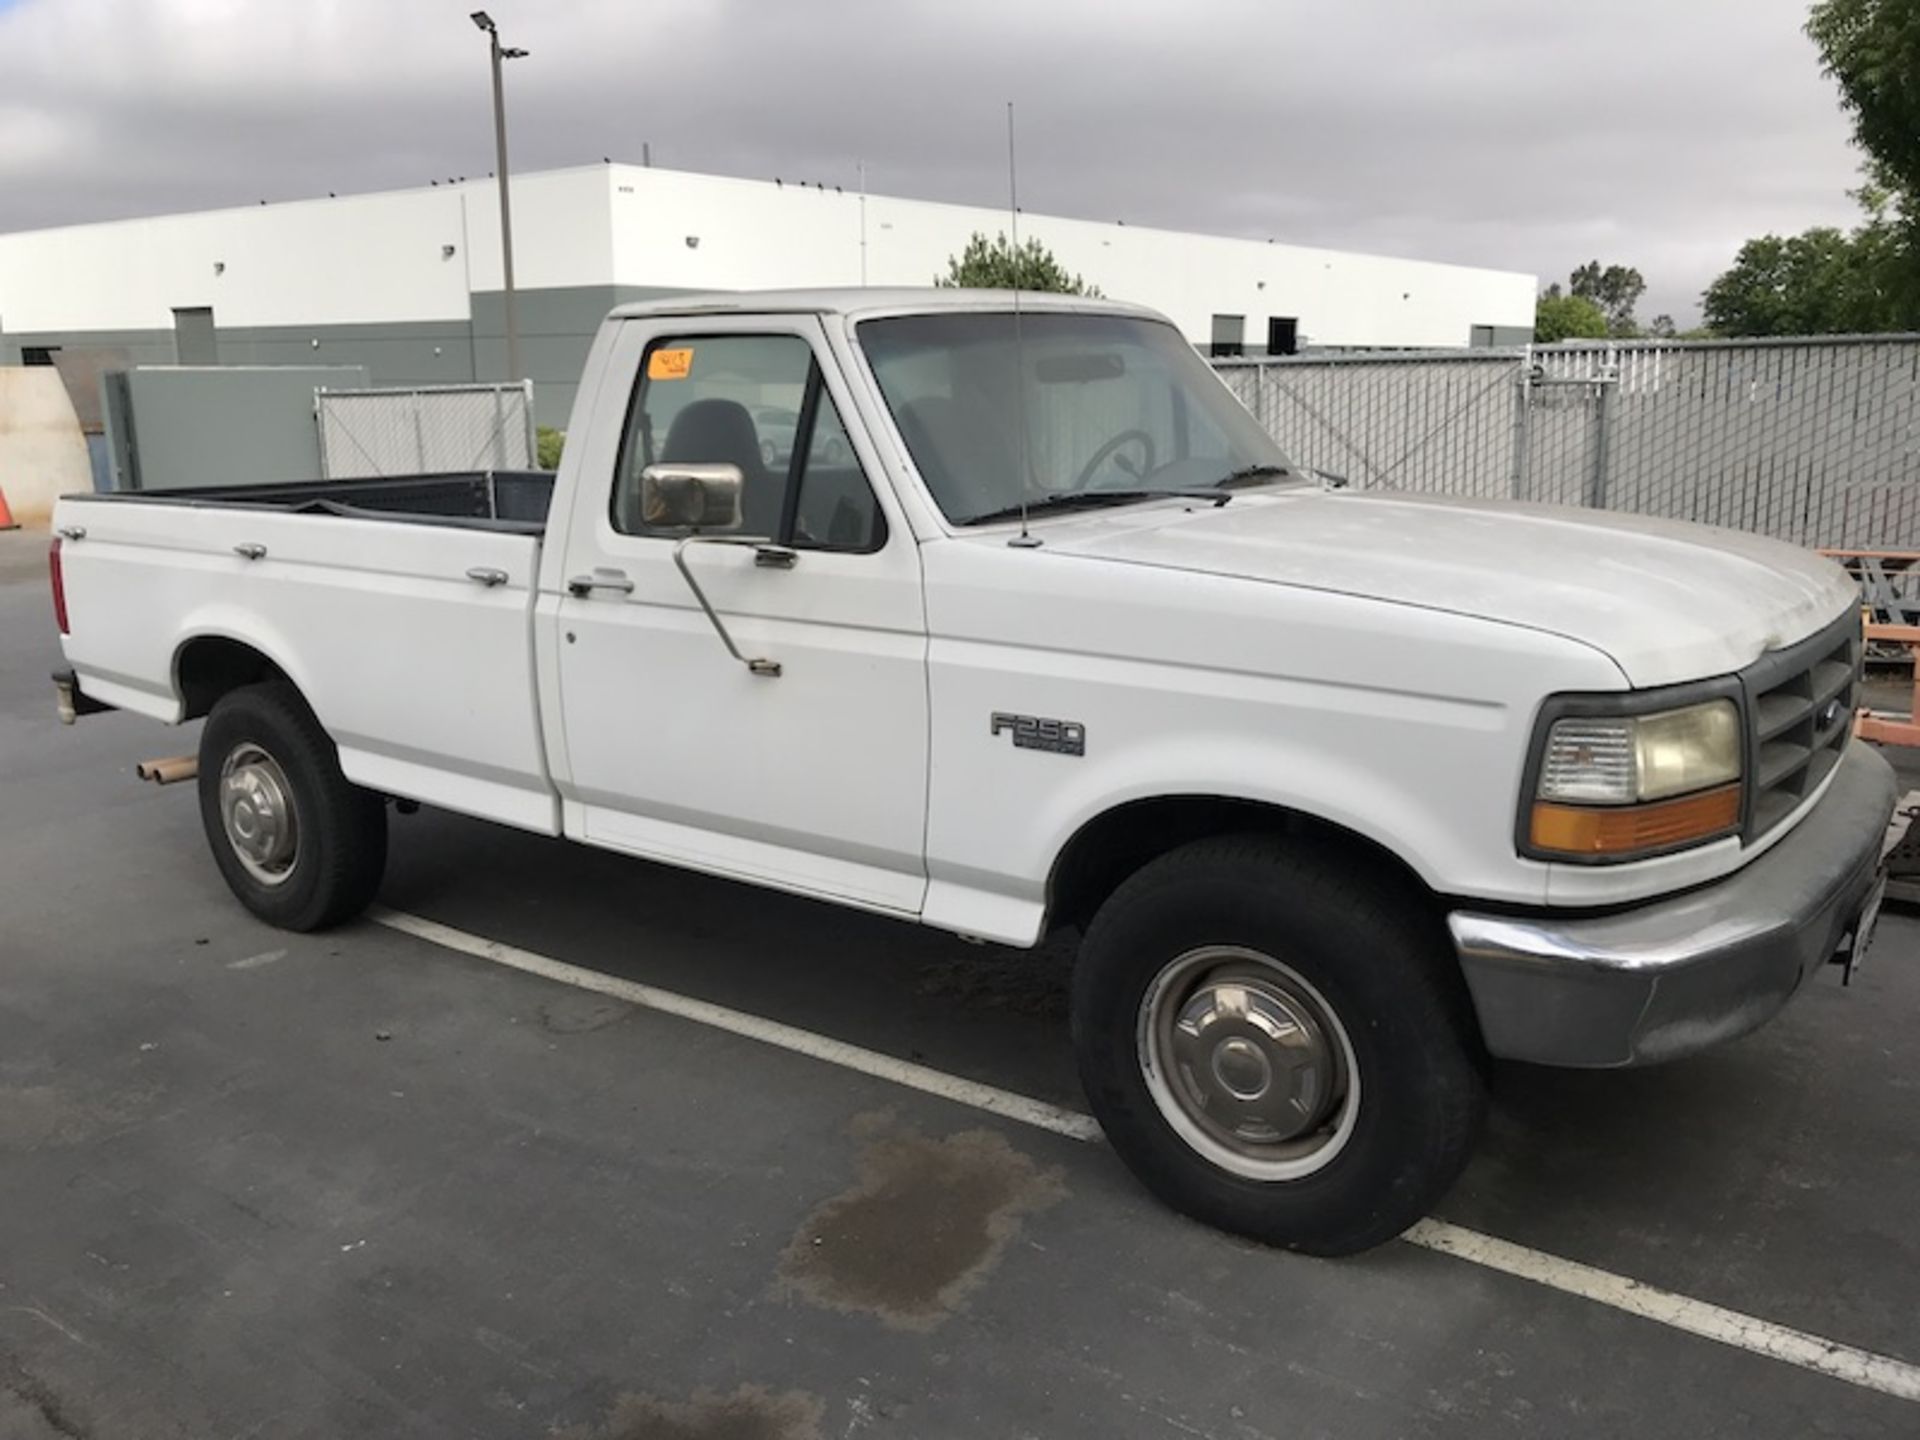 1997 Ford F250, VIN: 3FTHF25G1VMA59758 (No Title - Sold Bill OF Sale Only)